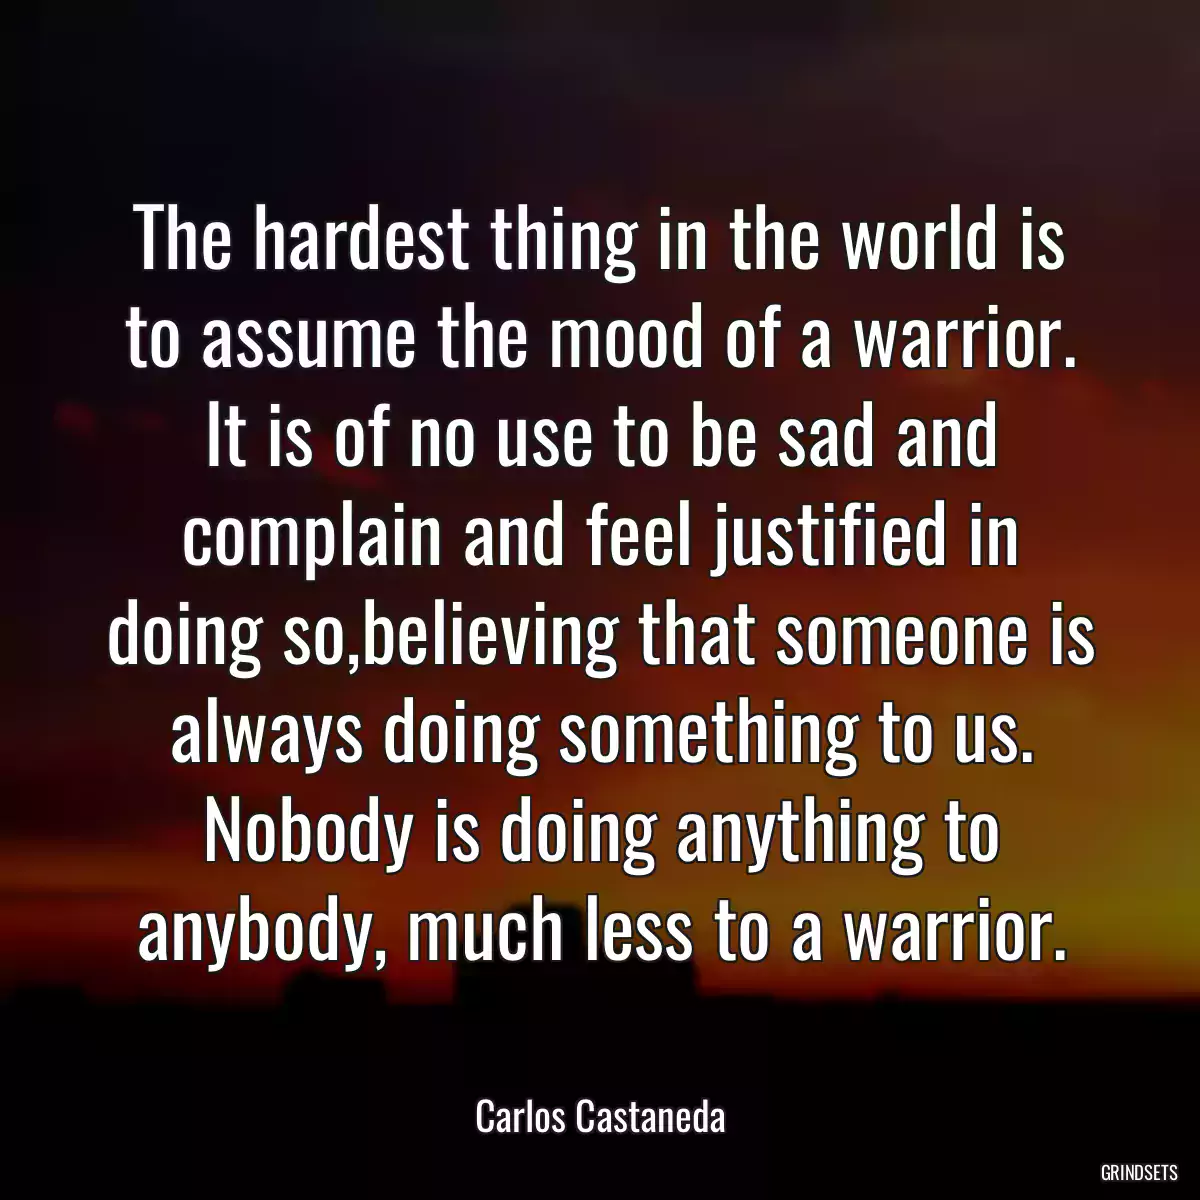 The hardest thing in the world is to assume the mood of a warrior. It is of no use to be sad and complain and feel justified in doing so,believing that someone is always doing something to us. Nobody is doing anything to anybody, much less to a warrior.